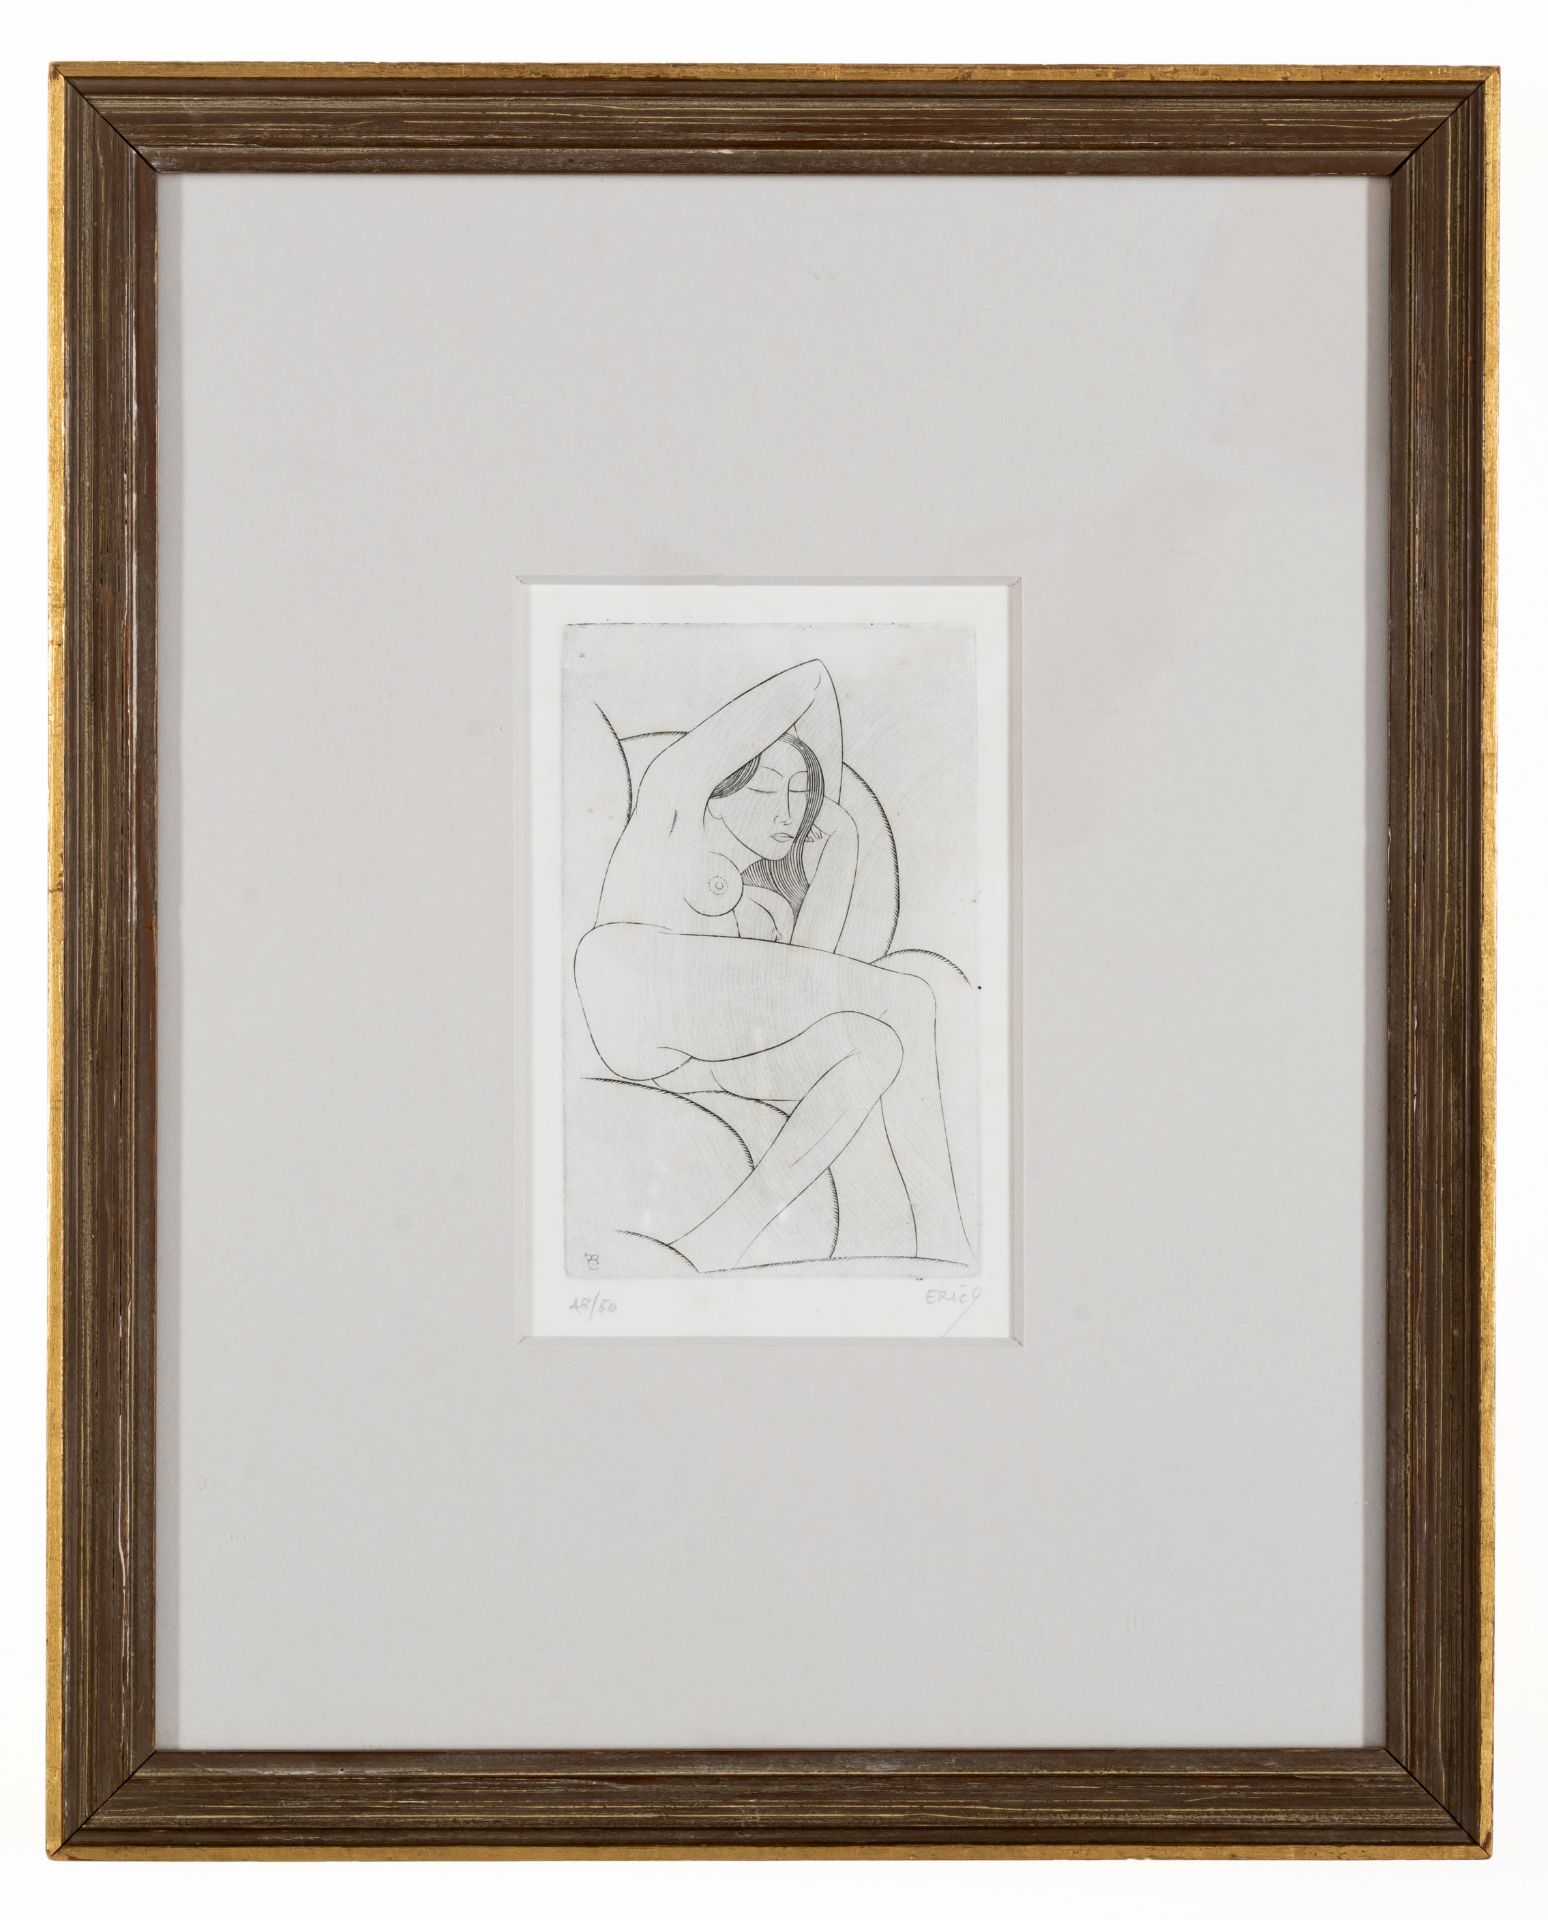 Gill (Eric) The Sofa, one of 50 intaglio prints signed by the artist in pencil, 1925.